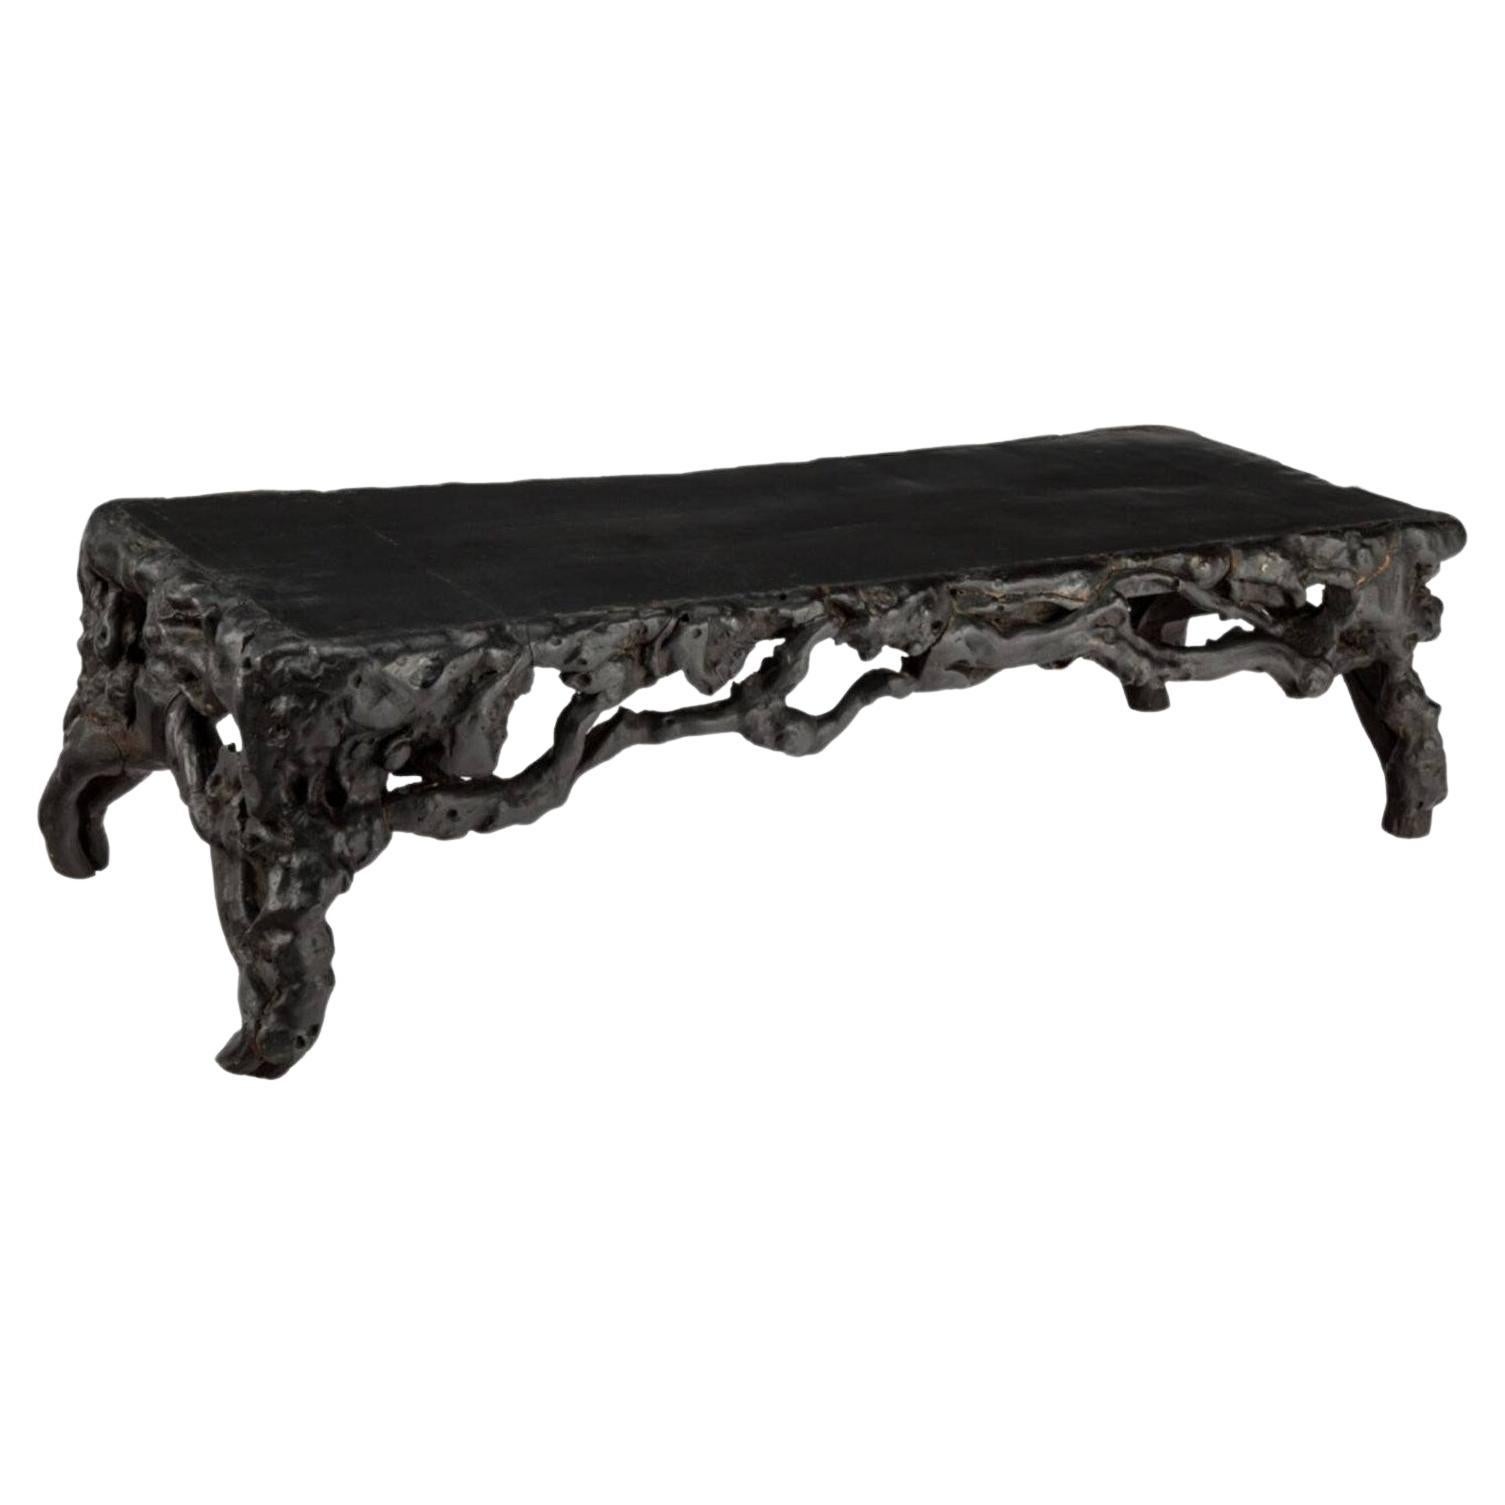 18th/19th Century Qing Dynasty Chinese Root-Wood Low Table